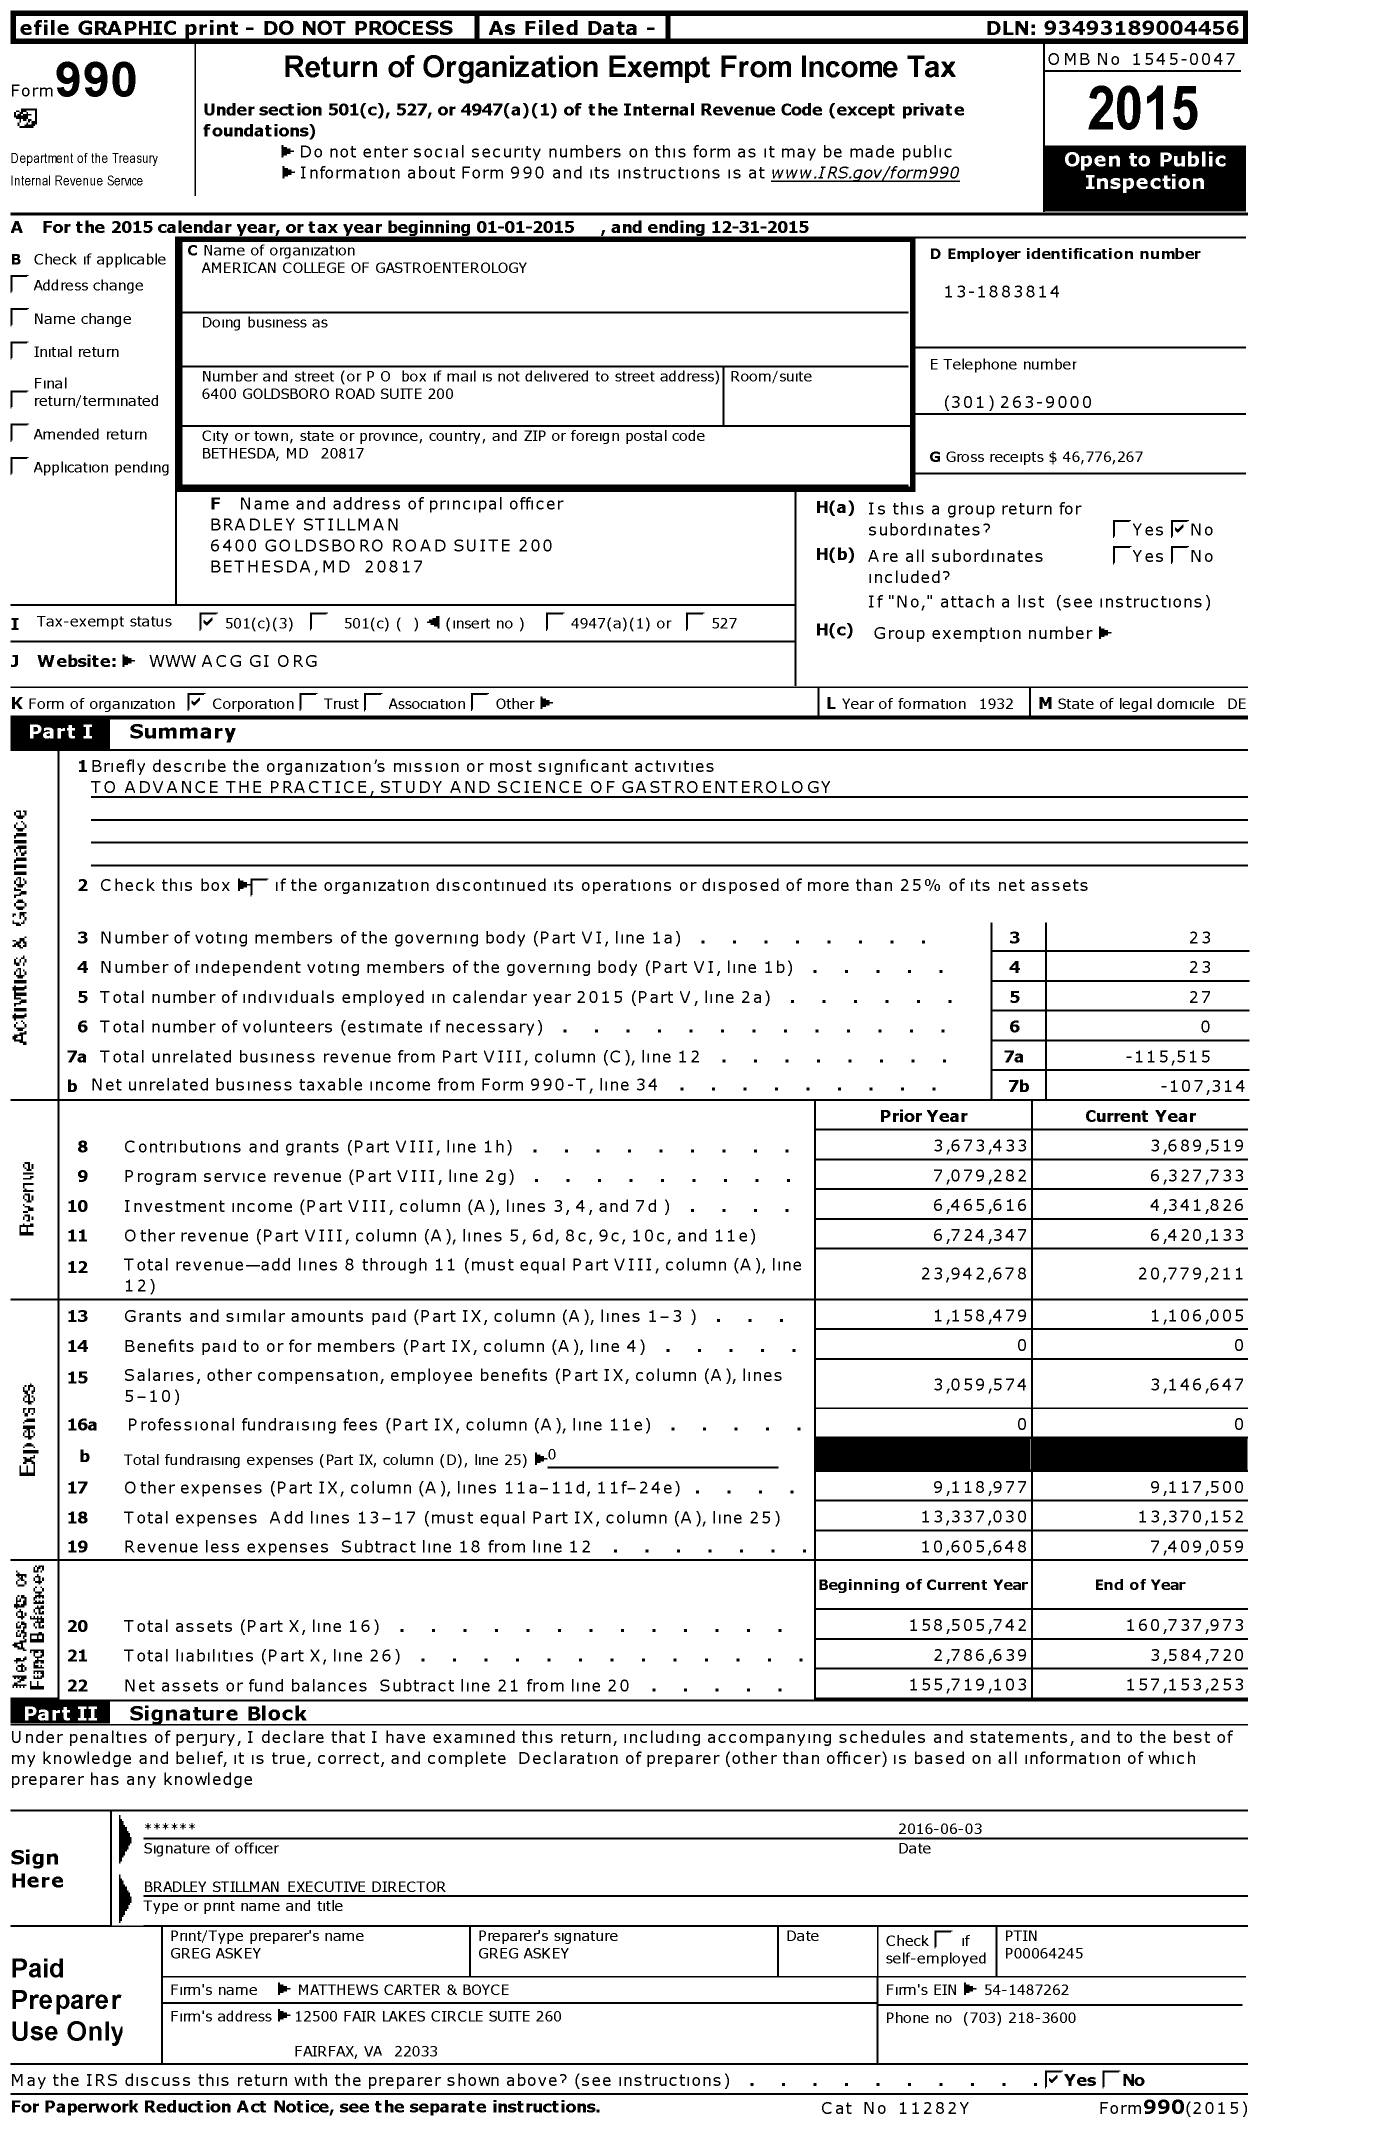 Image of first page of 2015 Form 990 for American College of Gastroenterology (ACG)